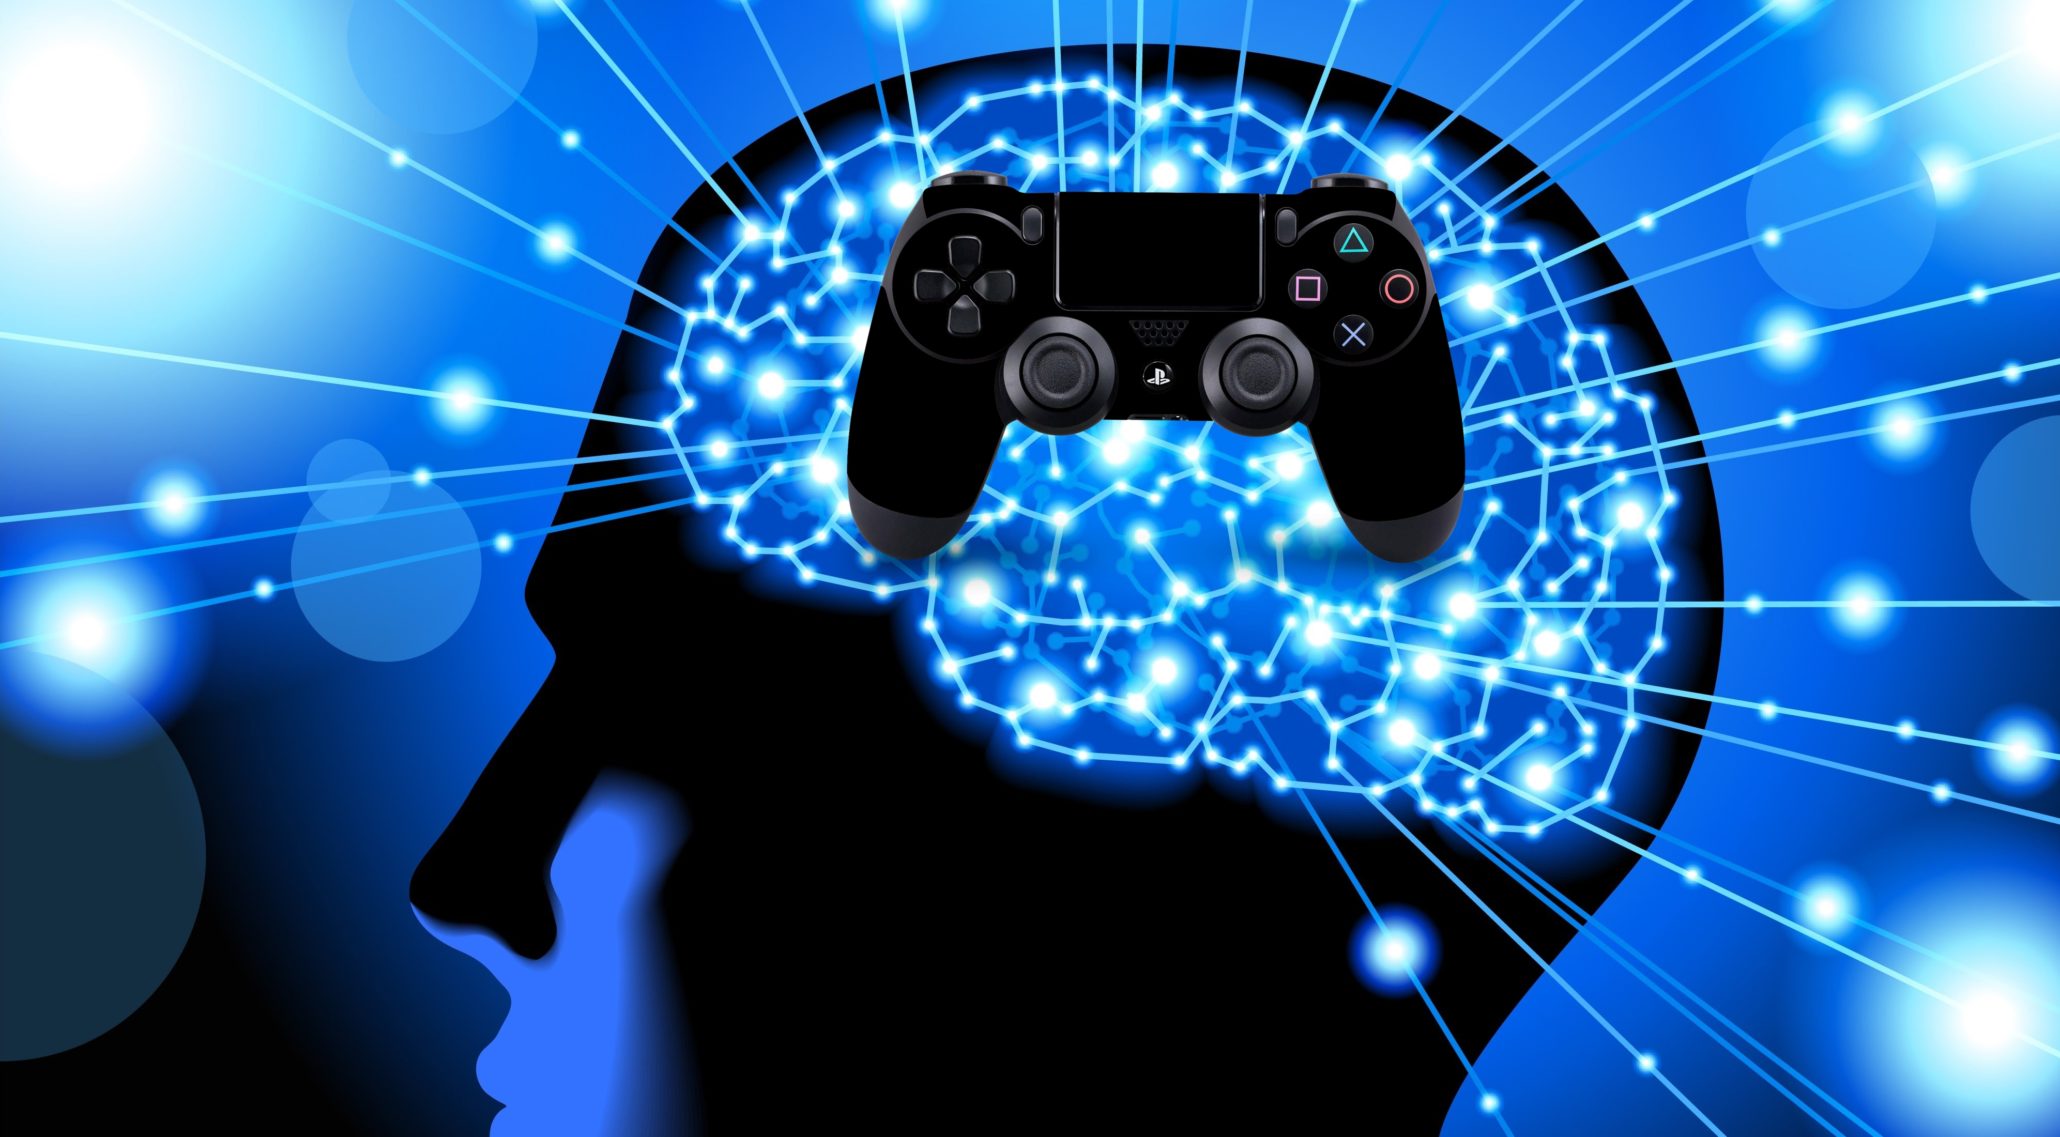 VIDEO GAMES AND MENTAL HEALTH